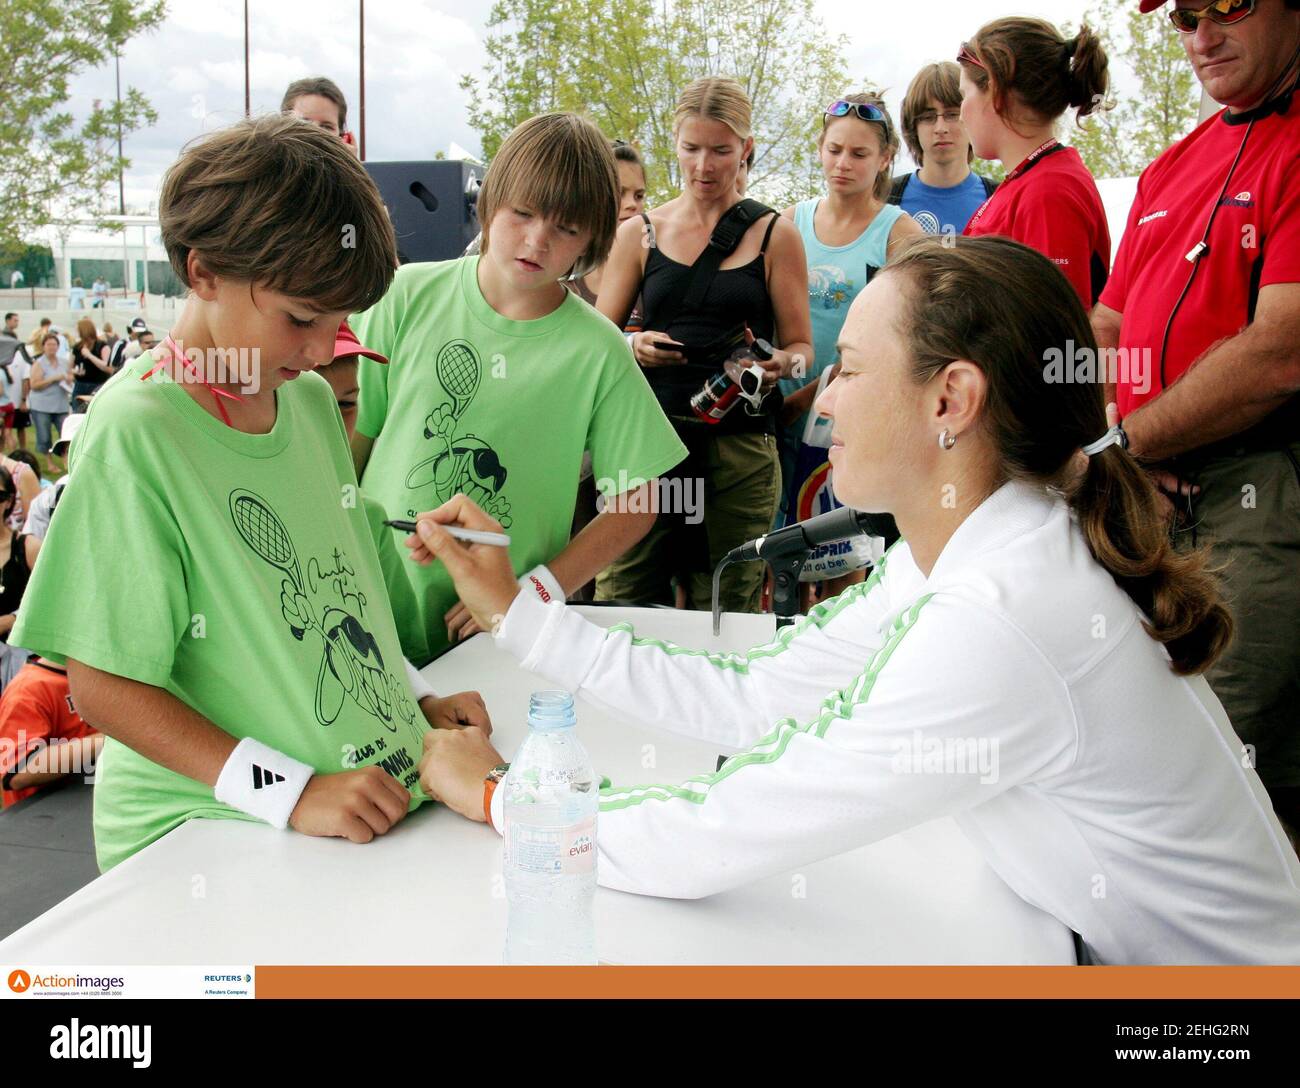 Tennis - Sony Ericsson WTA - Autograph Signing Session - Montreal, Canada - 16/8/06  Martina Hingis of Switzerland signs a shirt at the Rogers Cup, Sony Ericsson WTA Tour  Mandatory Credit: Action Images / Chris Wattie  Livepic Stock Photo